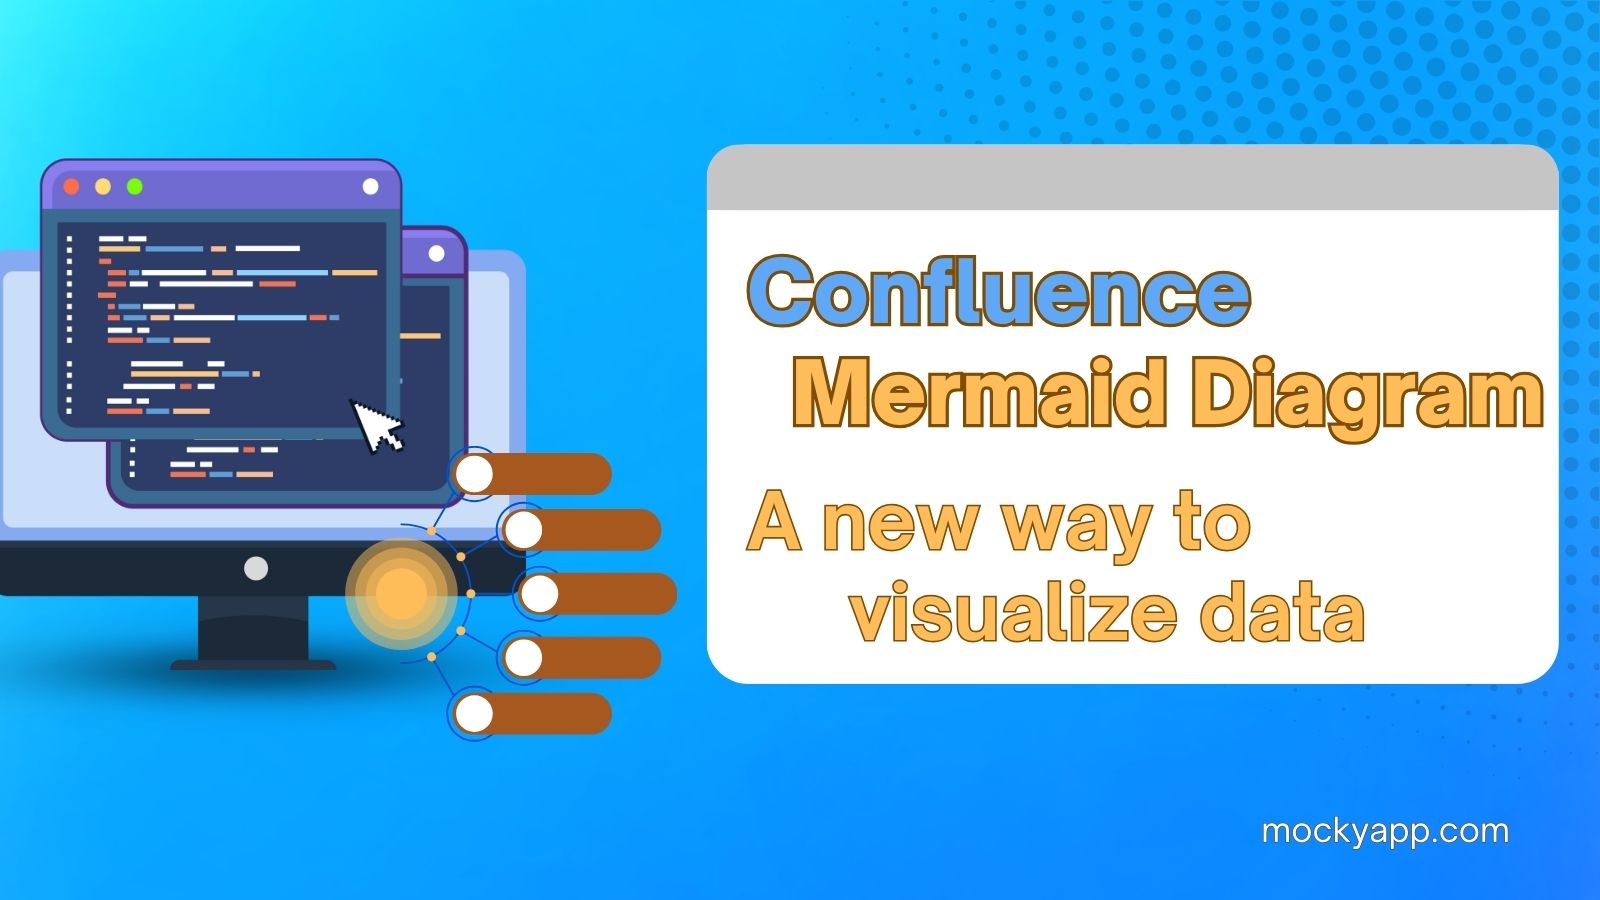 Confluence Mermaid Diagram: A new way to visualize data